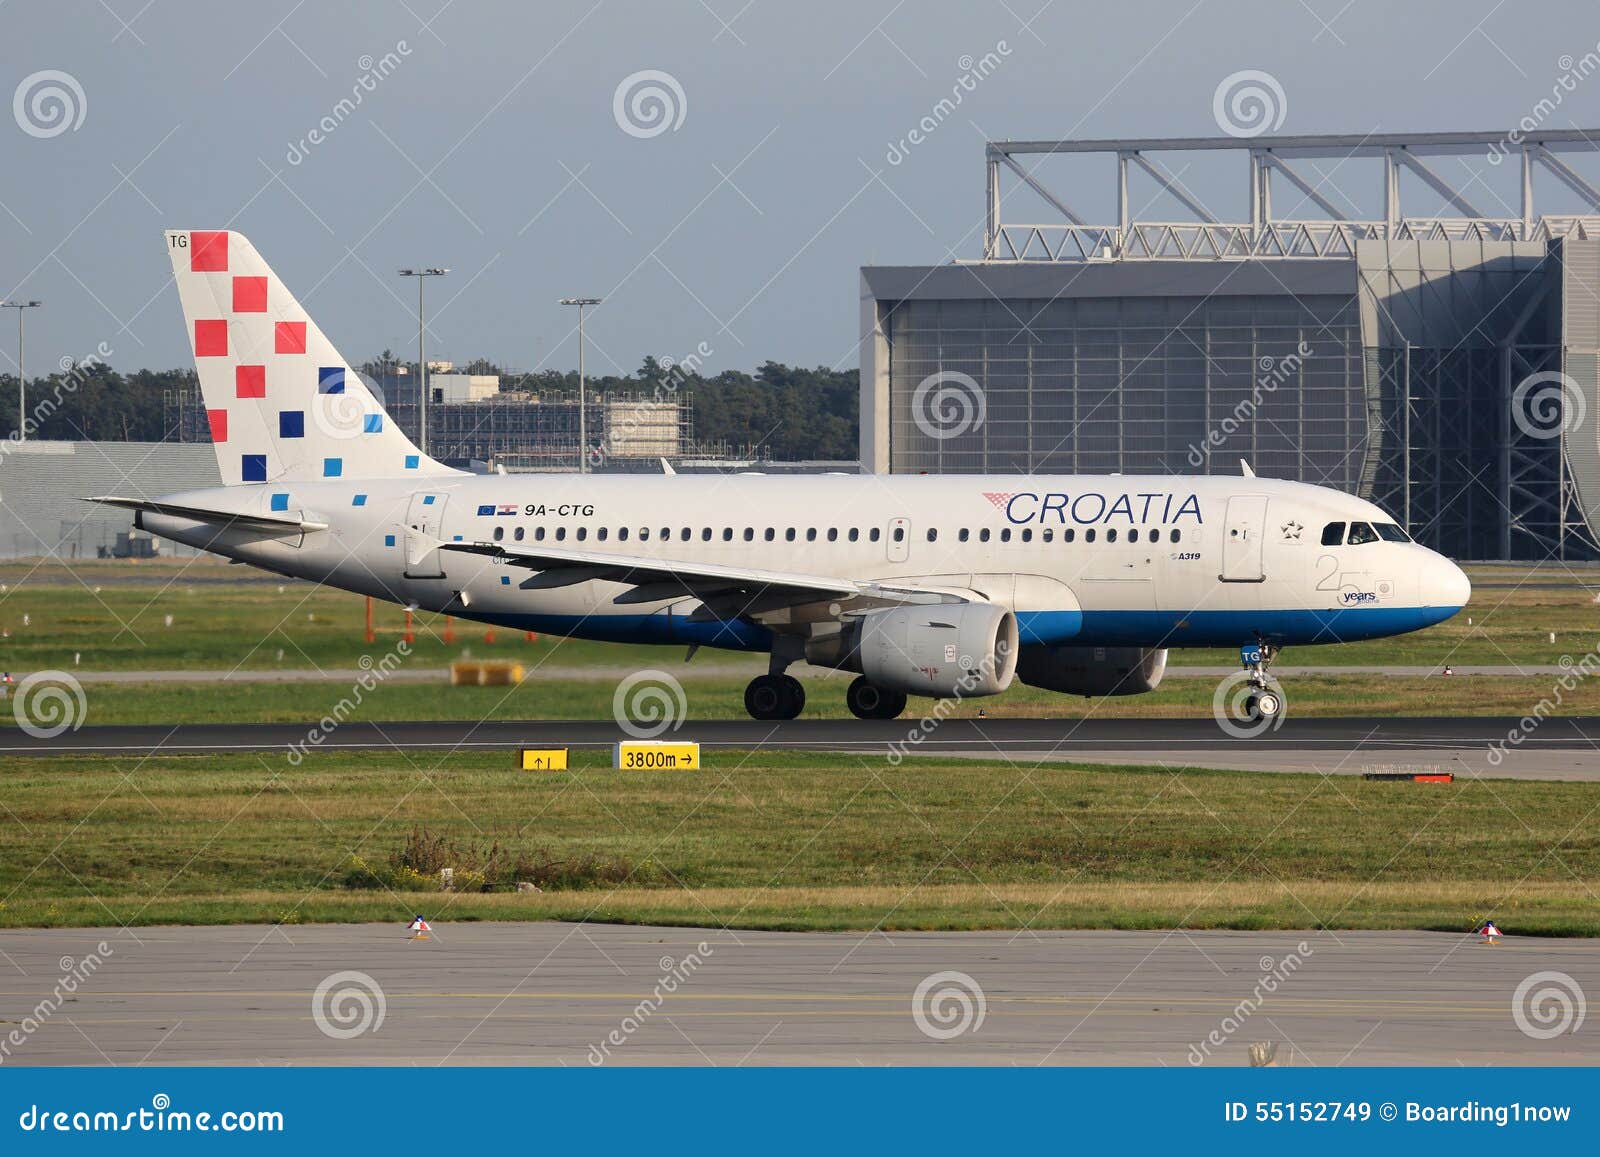 Croatia Airlines Airbus A319 Airplane Editorial Stock Image Image Of Aviation Editorial 55152749